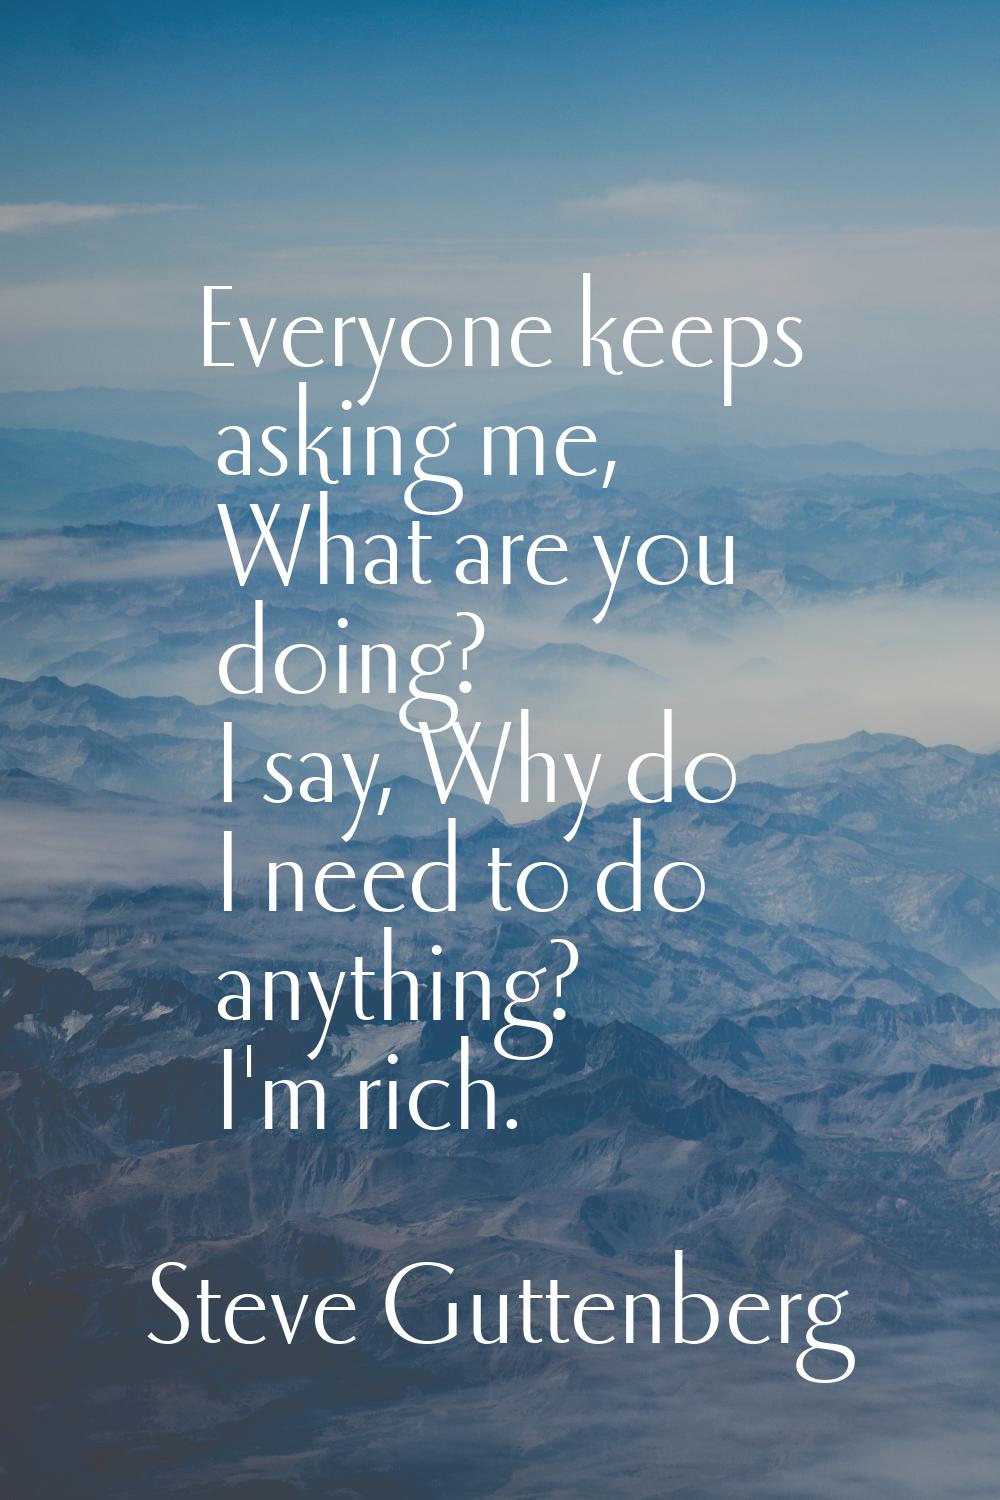 Everyone keeps asking me, What are you doing? I say, Why do I need to do anything? I'm rich.